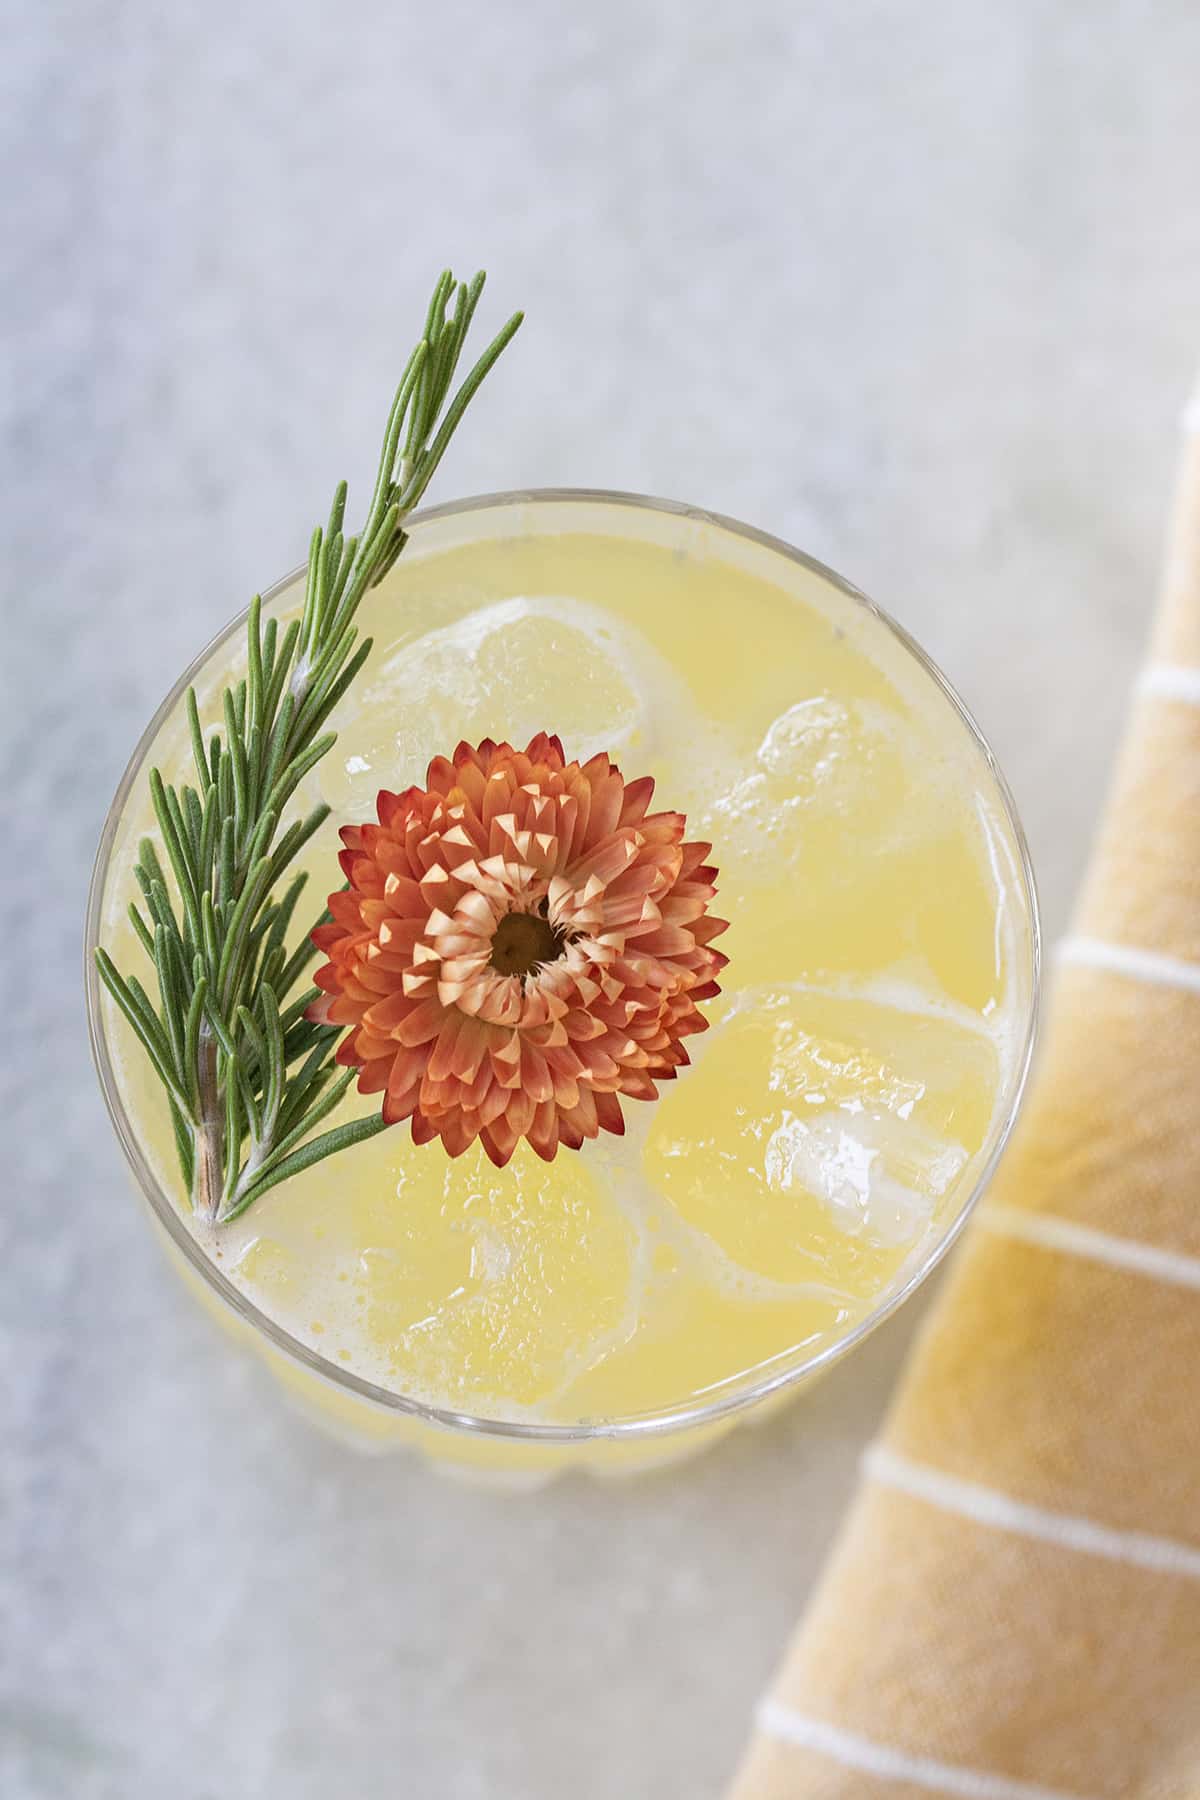 A cocktail with pineapple juice garnished with a flower.